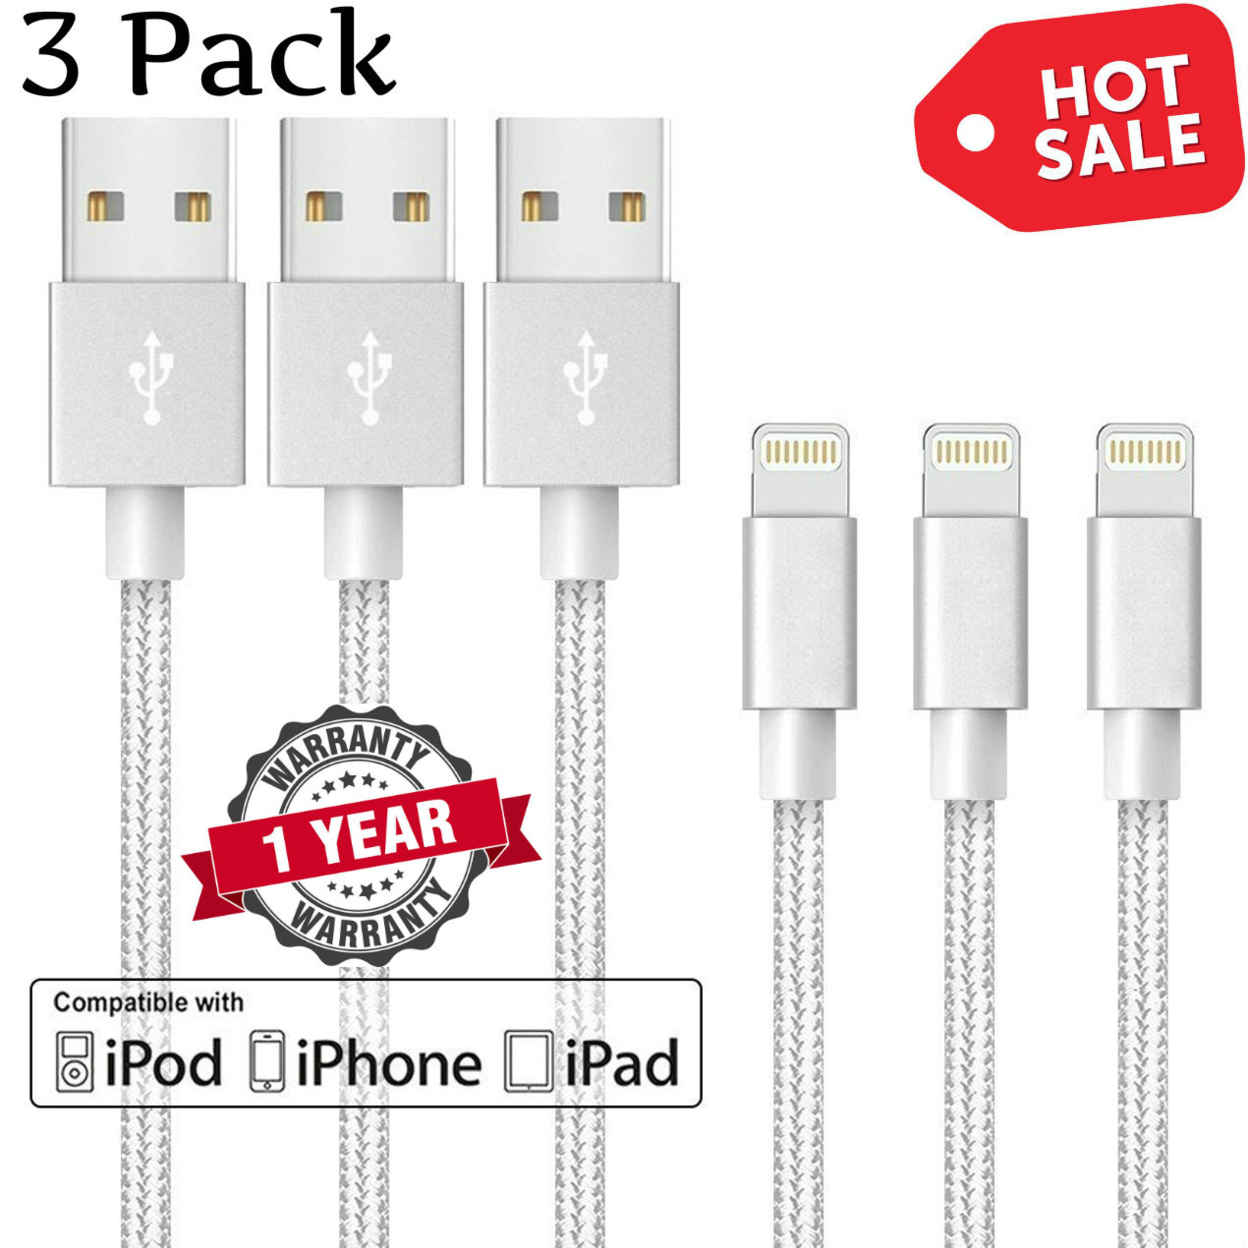 6 FT Heavy Duty Braided 8 Pin USB Charger Cable Cord For Apple IPhone - White, 4